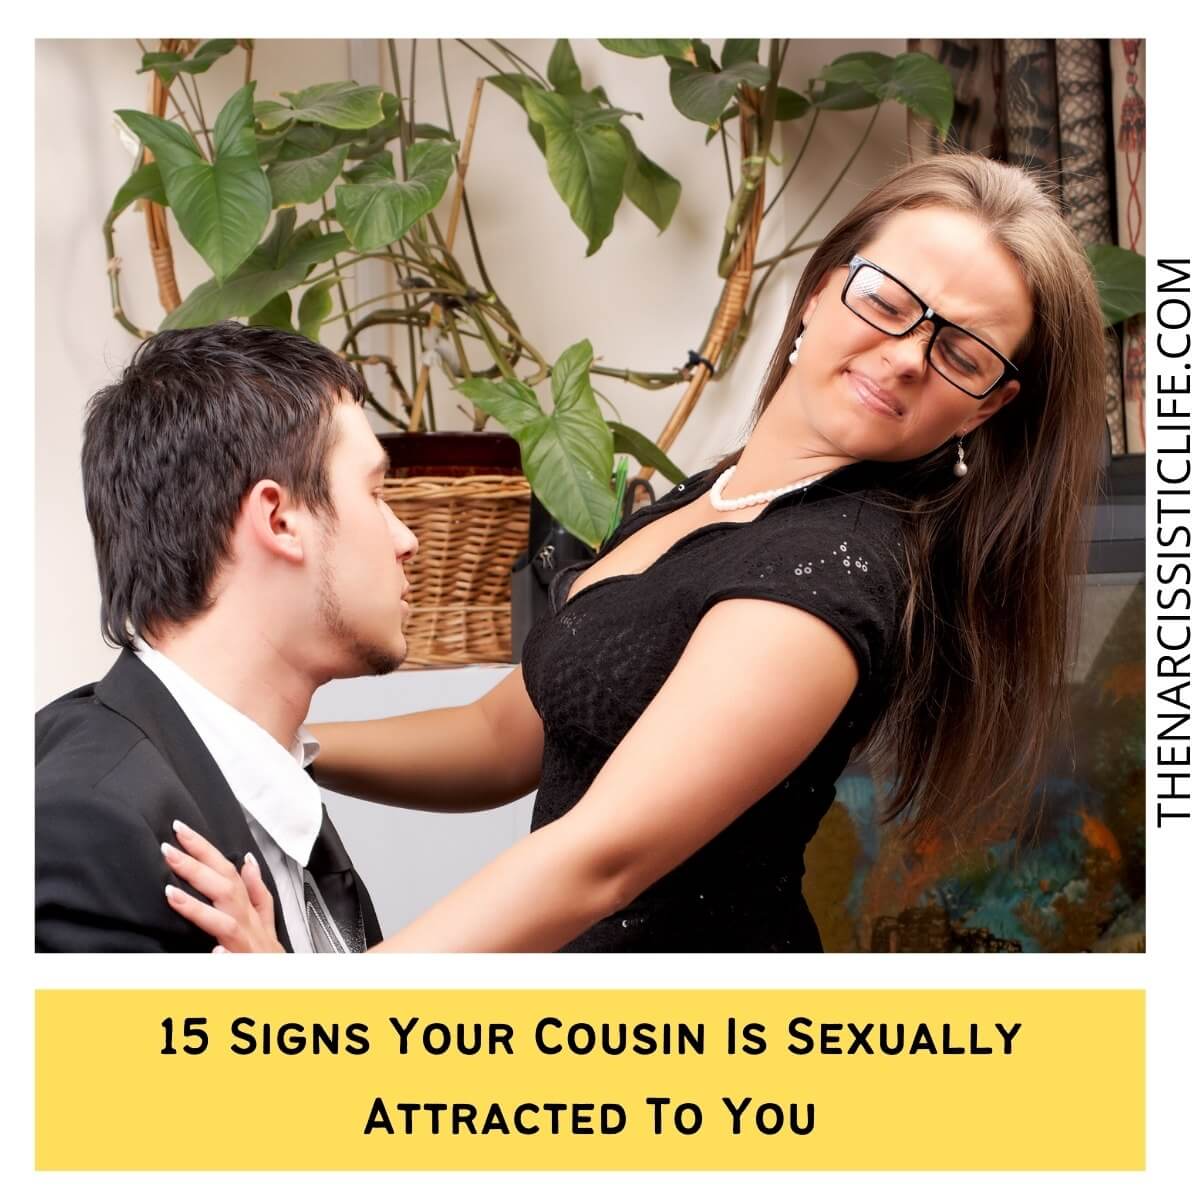 15 Signs Your Cousin Is Sexually Attracted To You - The Narcissistic Life